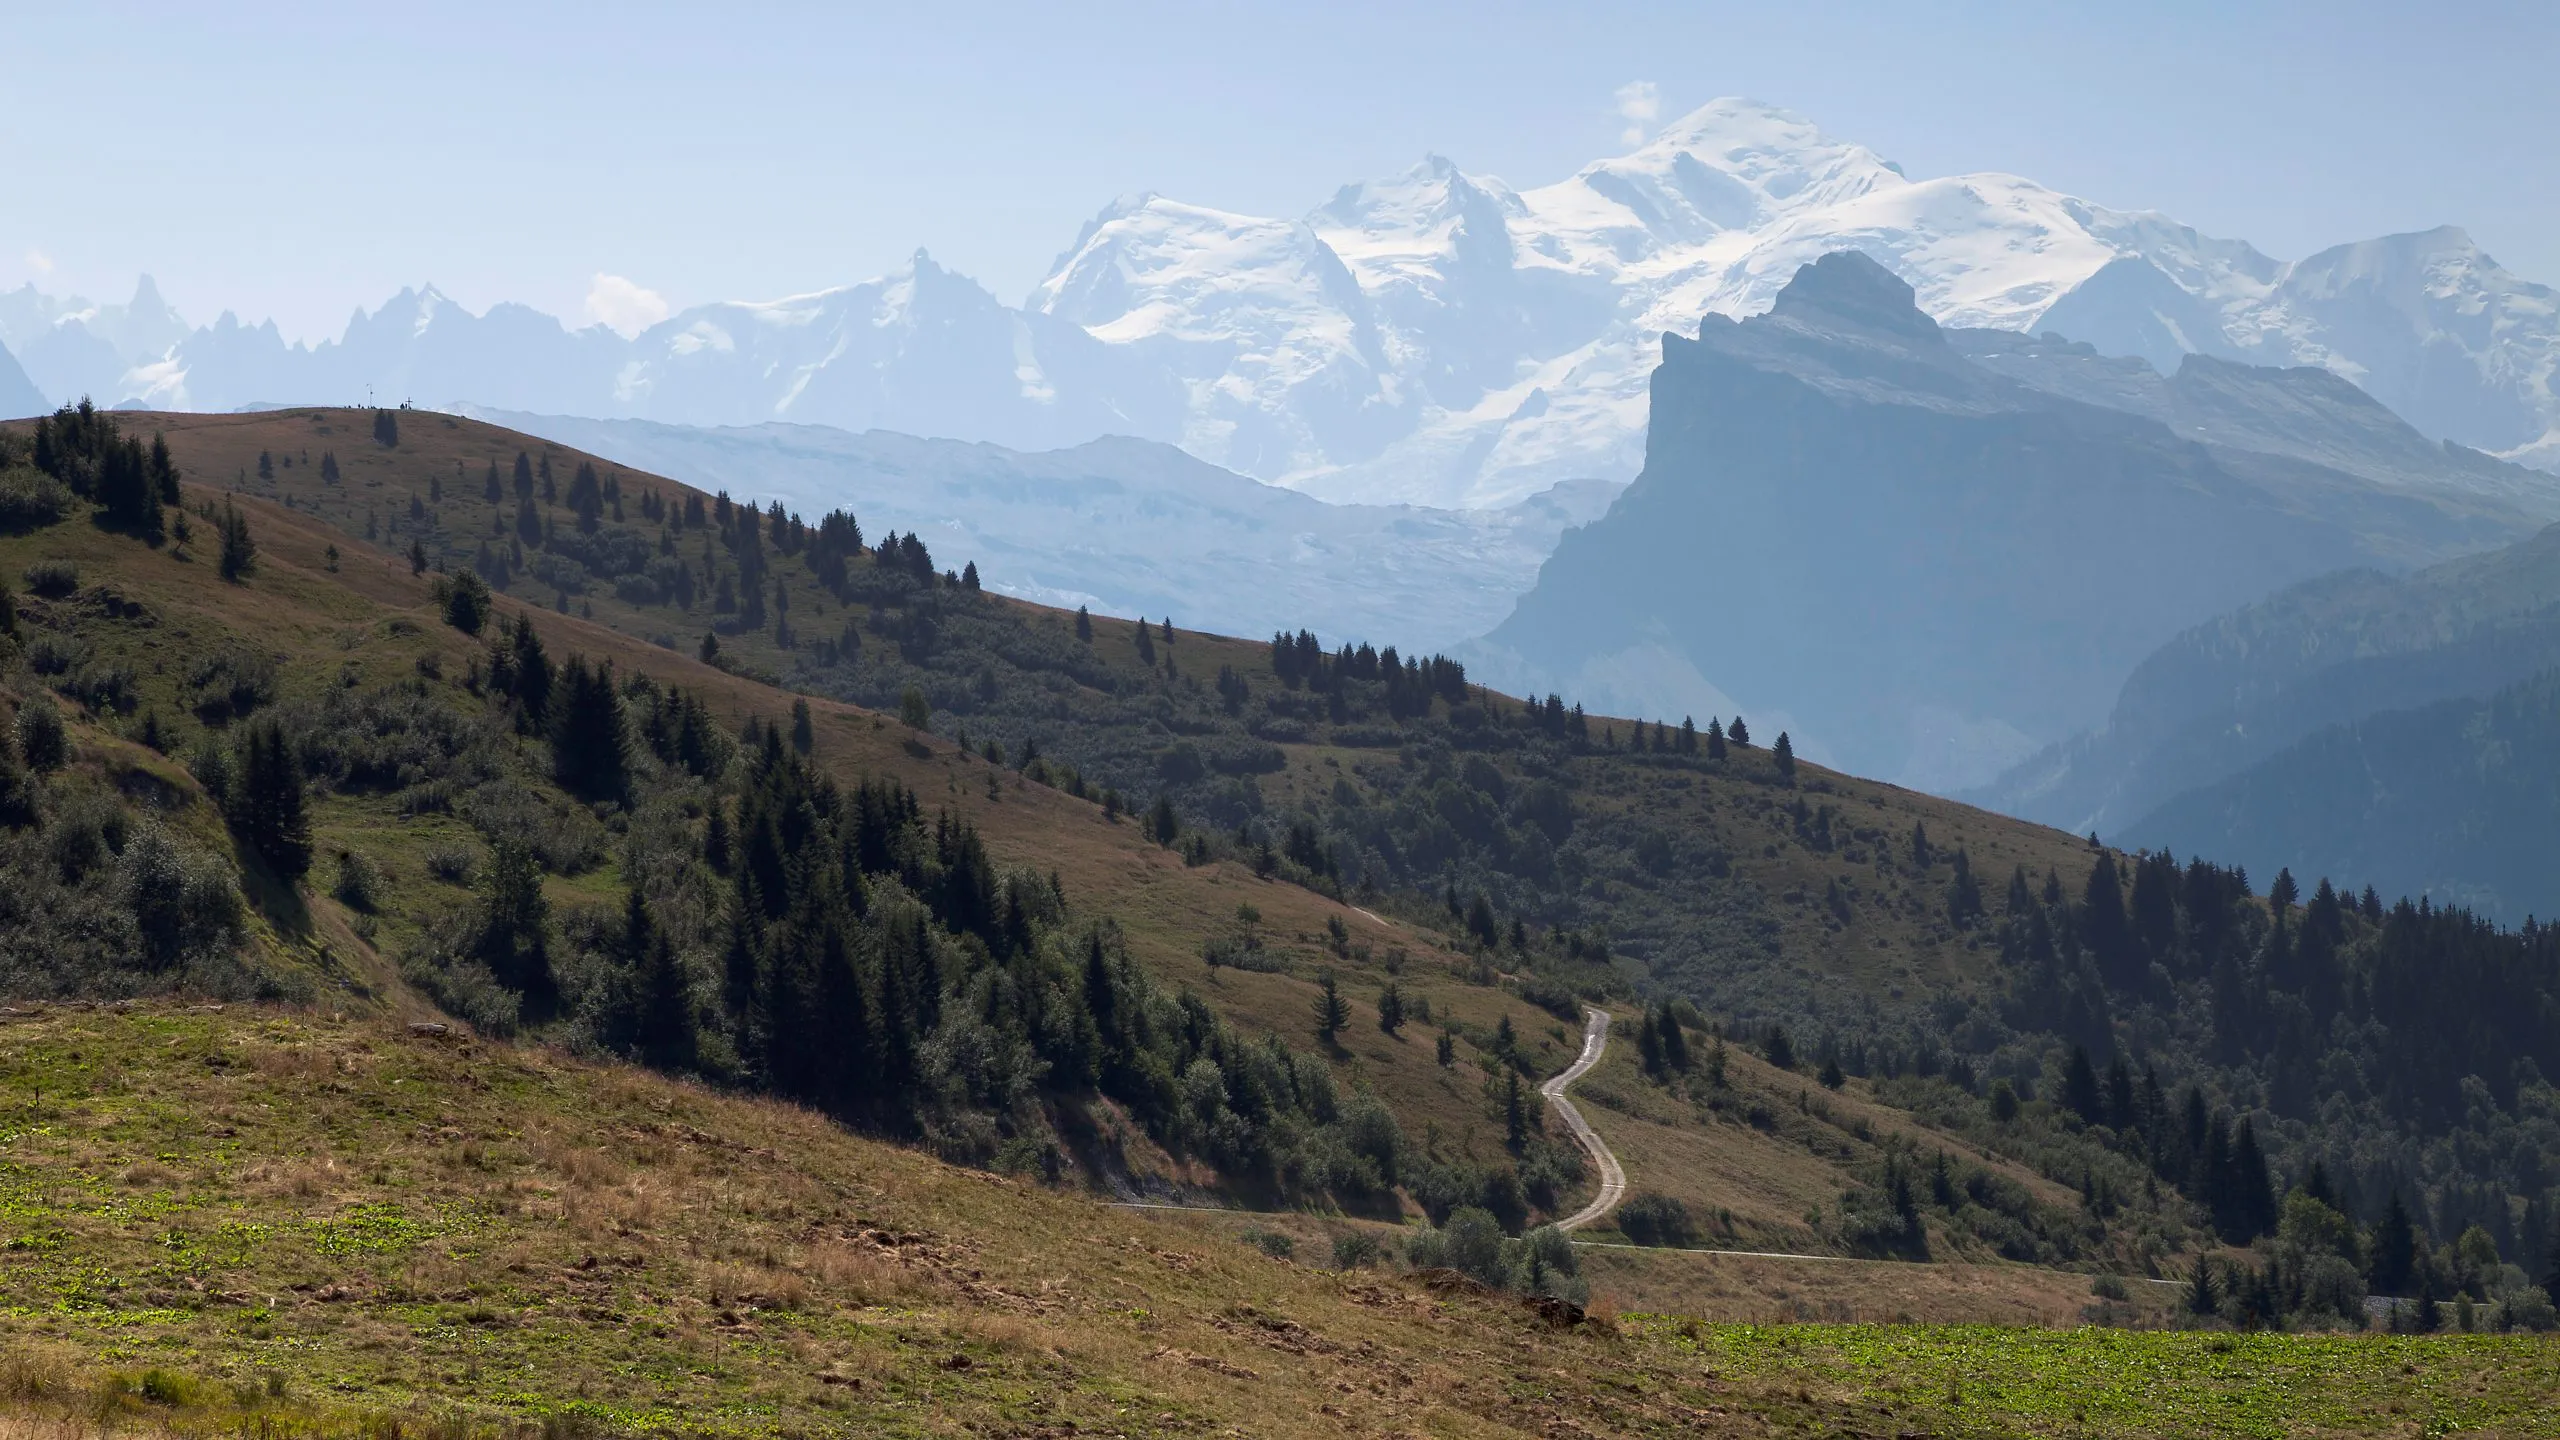 Summertime view to snow-capped Mont Blanc from Col de Joux Plane (between Morzine and Samoens in the French Alps)